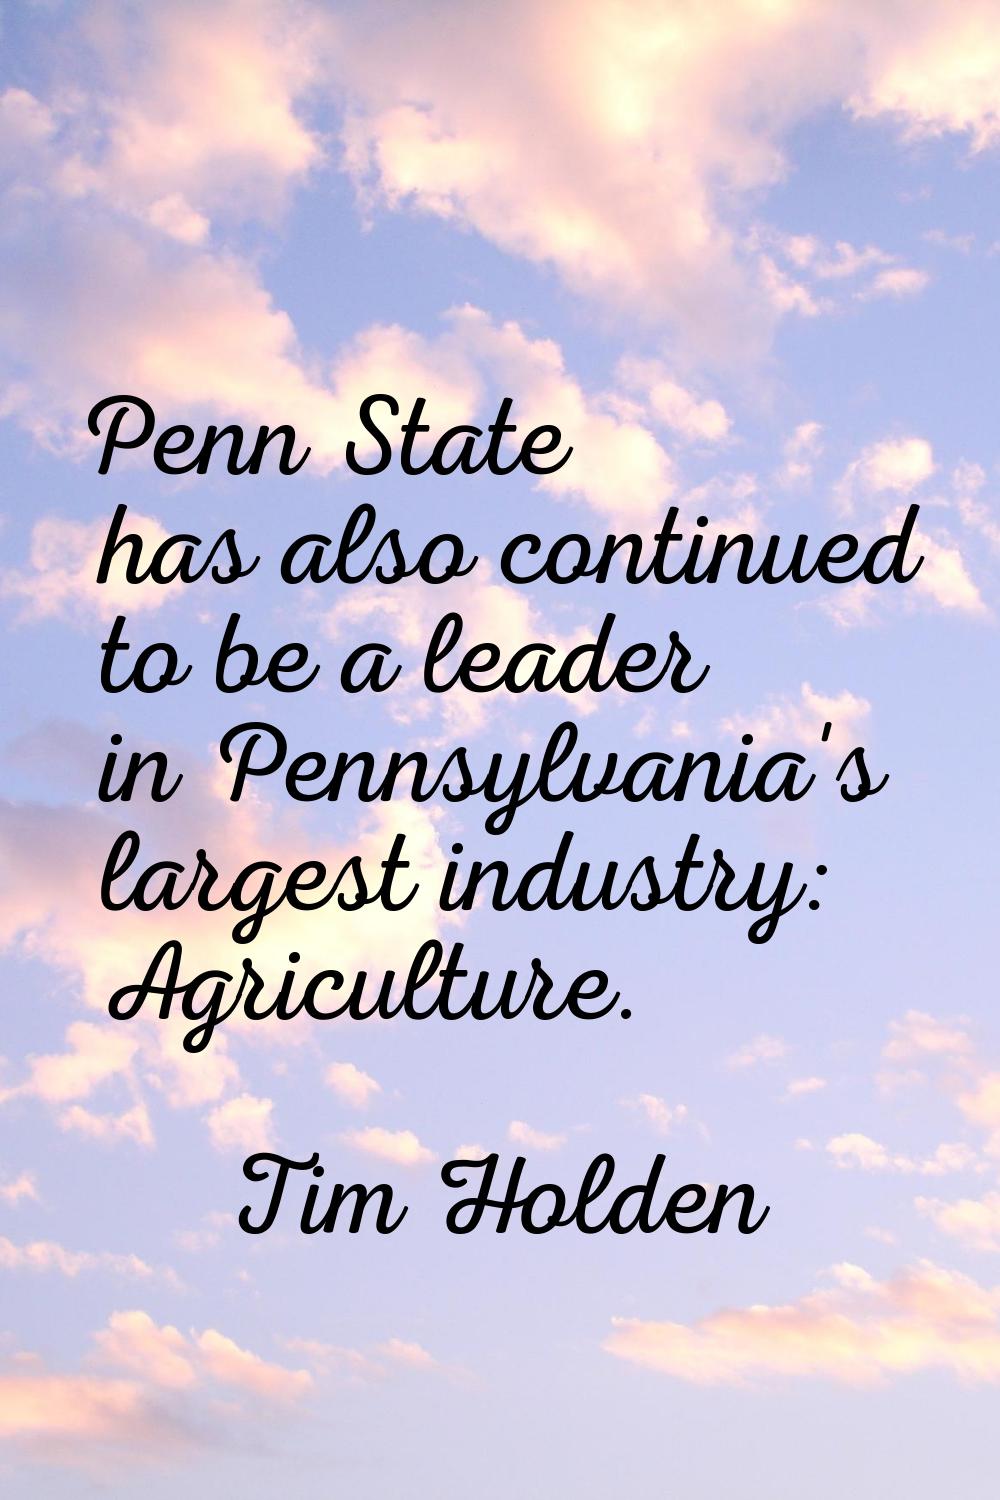 Penn State has also continued to be a leader in Pennsylvania's largest industry: Agriculture.